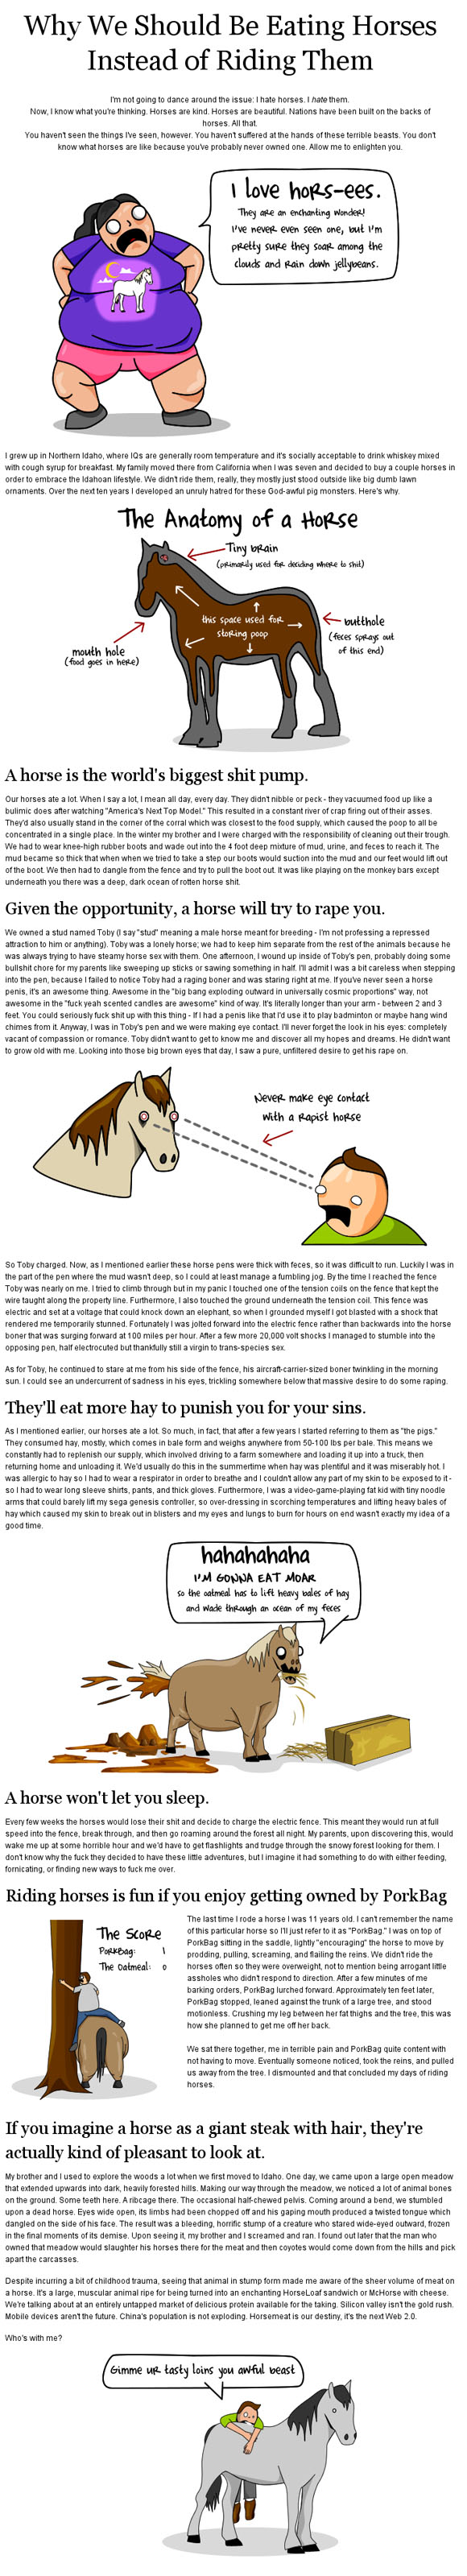 Why We Should Be Eating Horses instead of riding them